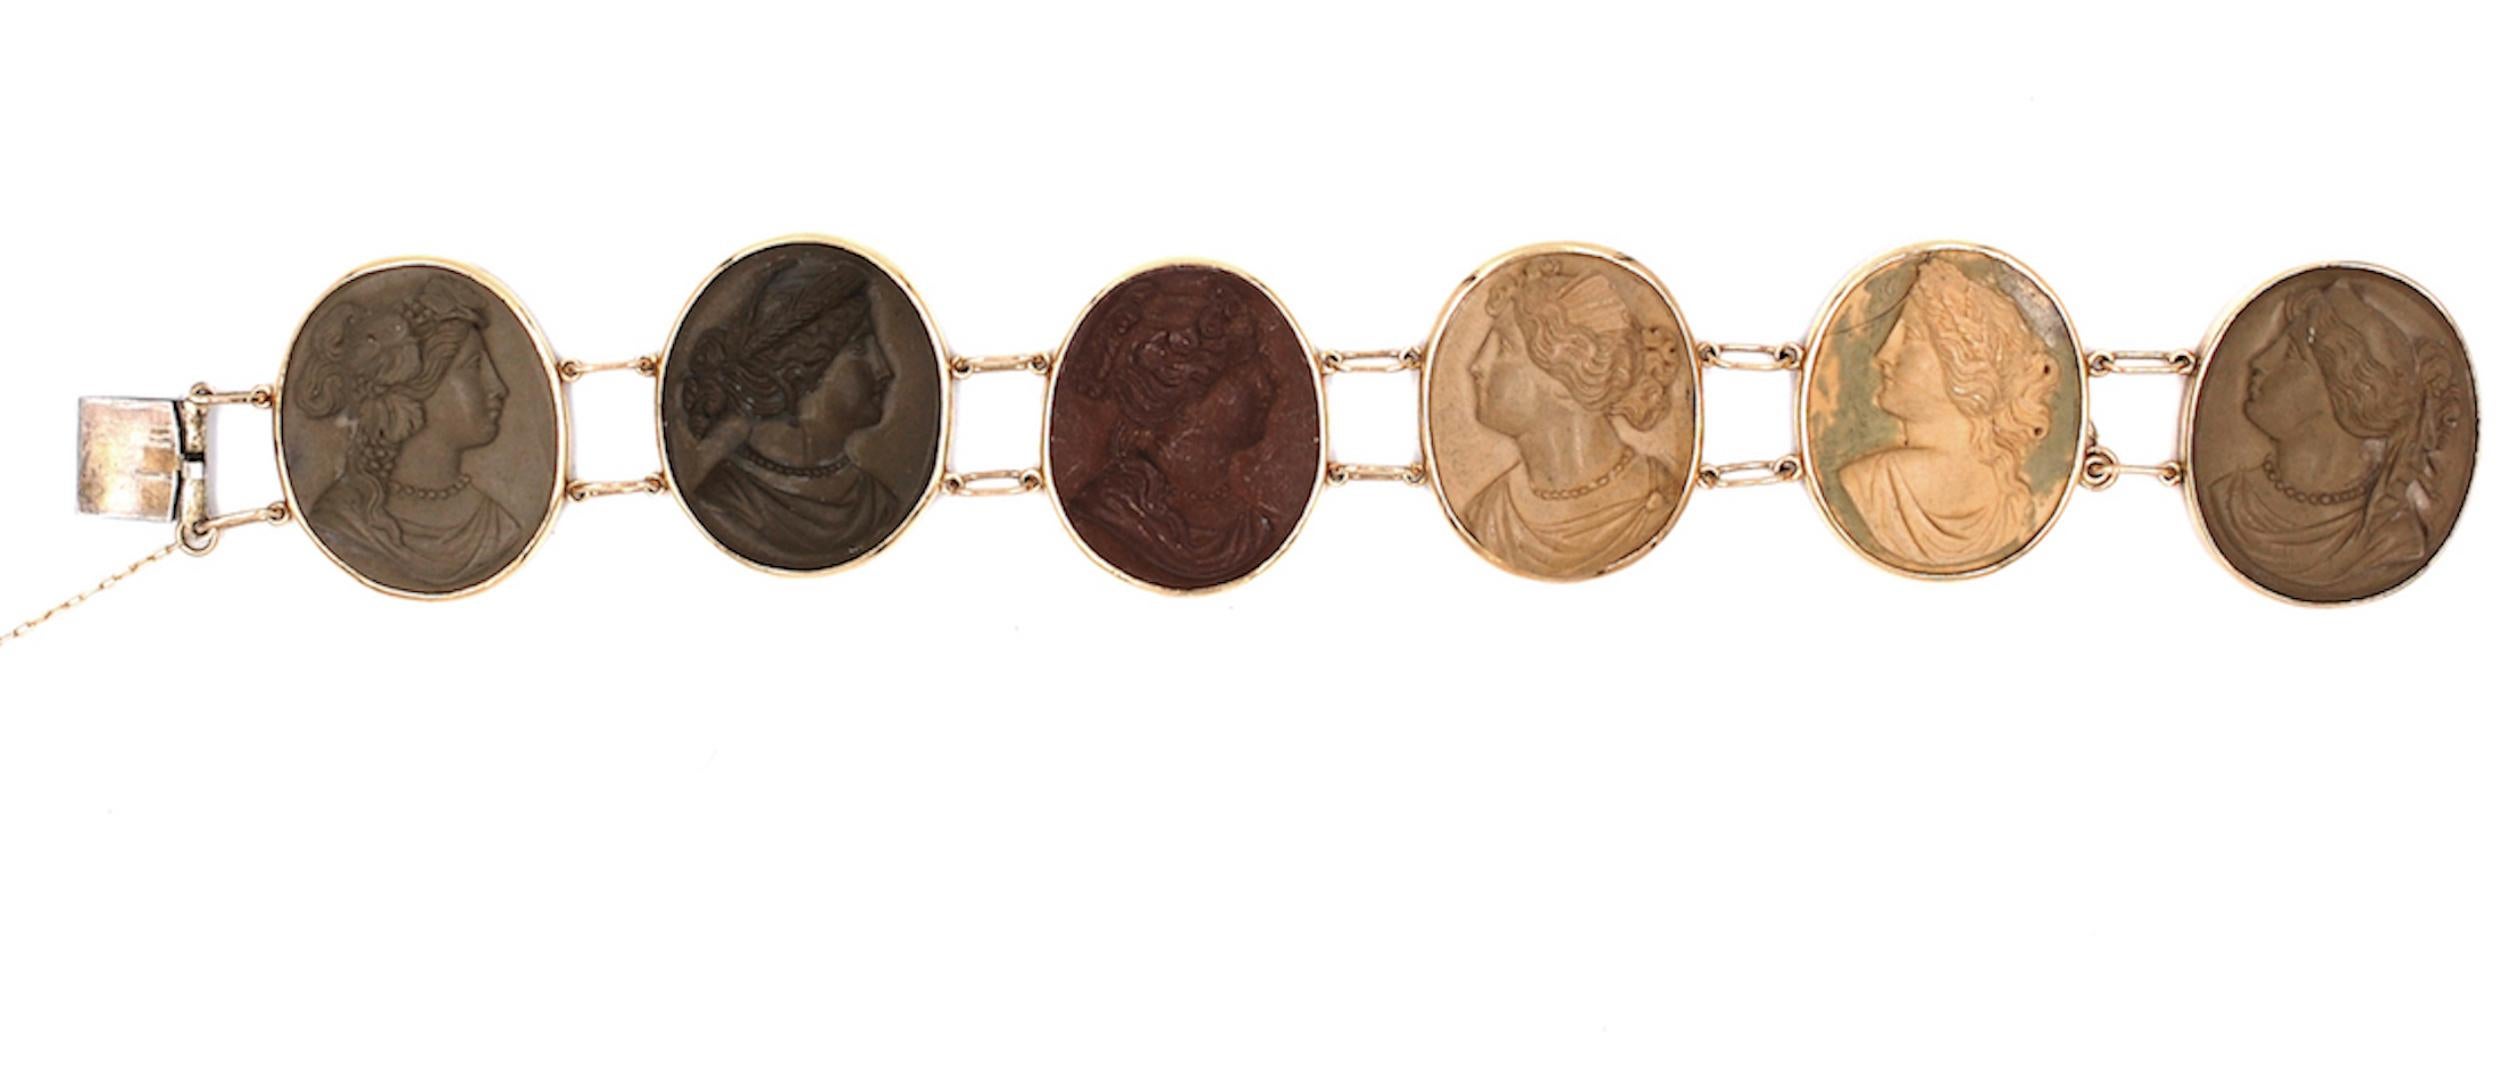 Vintage, 14 karat Hand Carved, Lava Cameo Bracelet 
Measuring 8 inches in length this beautiful bracelet is made of 14 karat yellow gold bezel setting, securing 6 cameos. Each cameo is a different carving and measure 1 ½ x 1 inch width 
Links